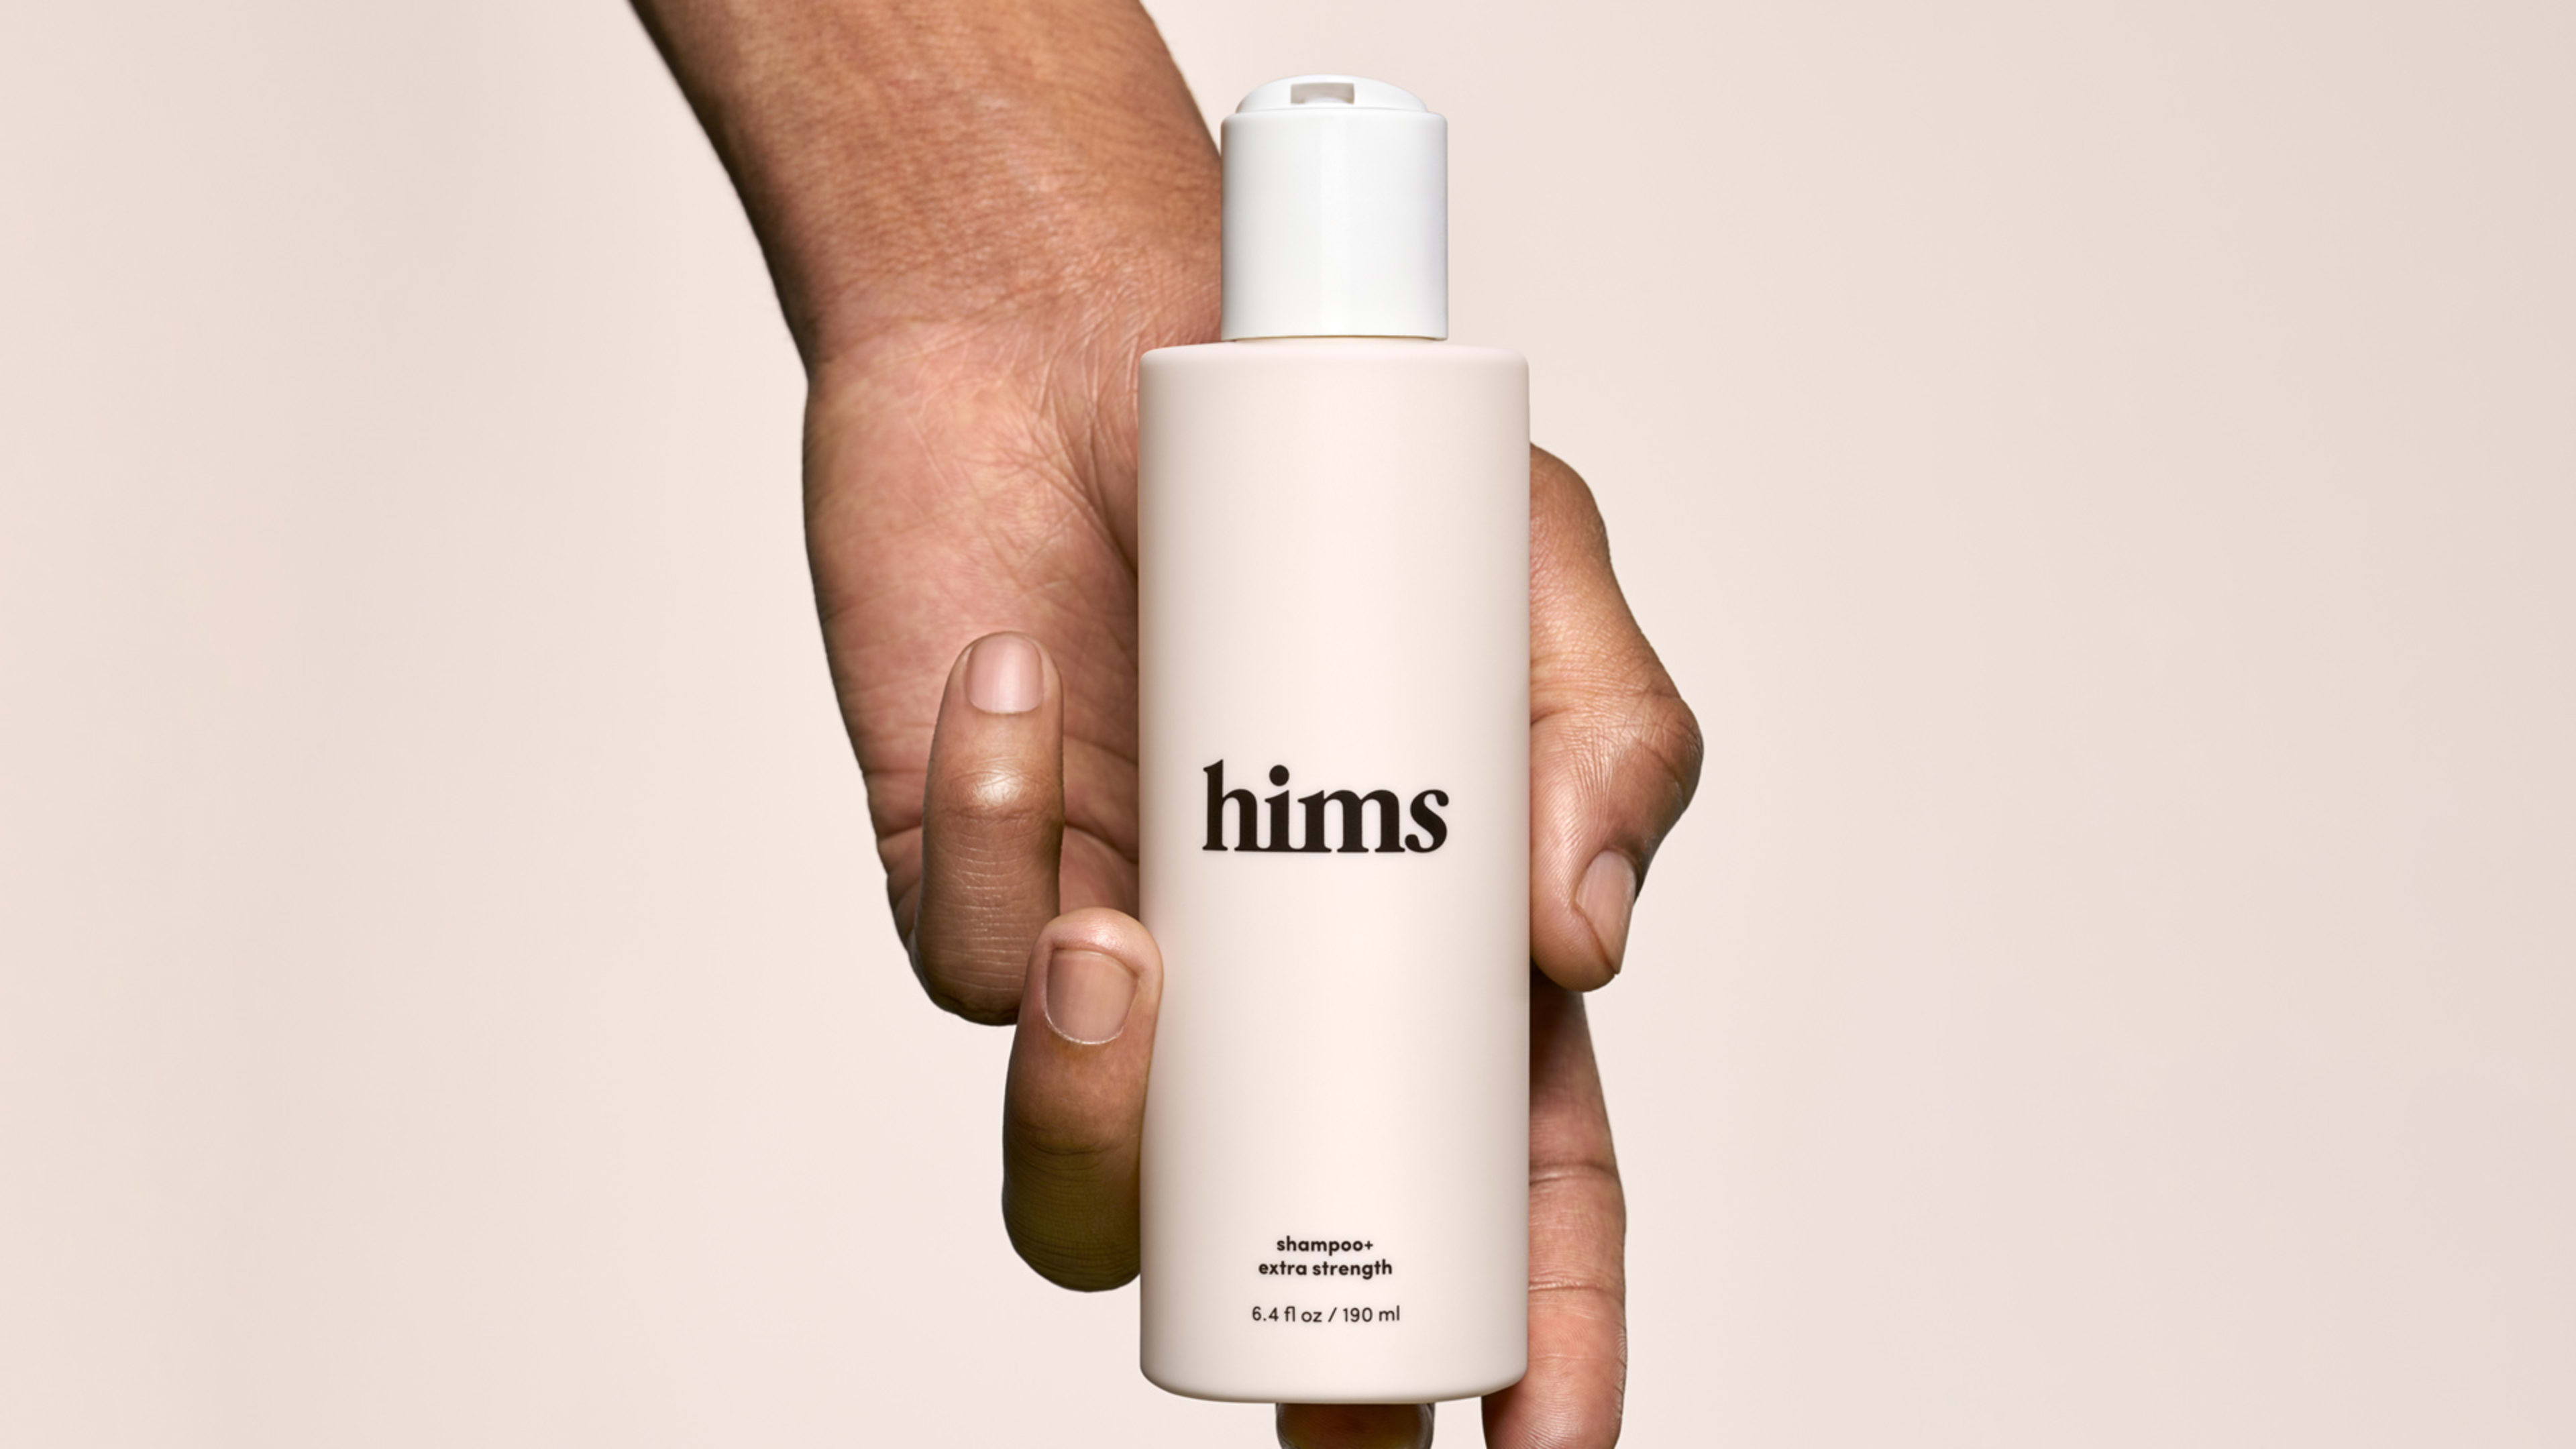 Hims & Hers is bringing its health products to all 50 states